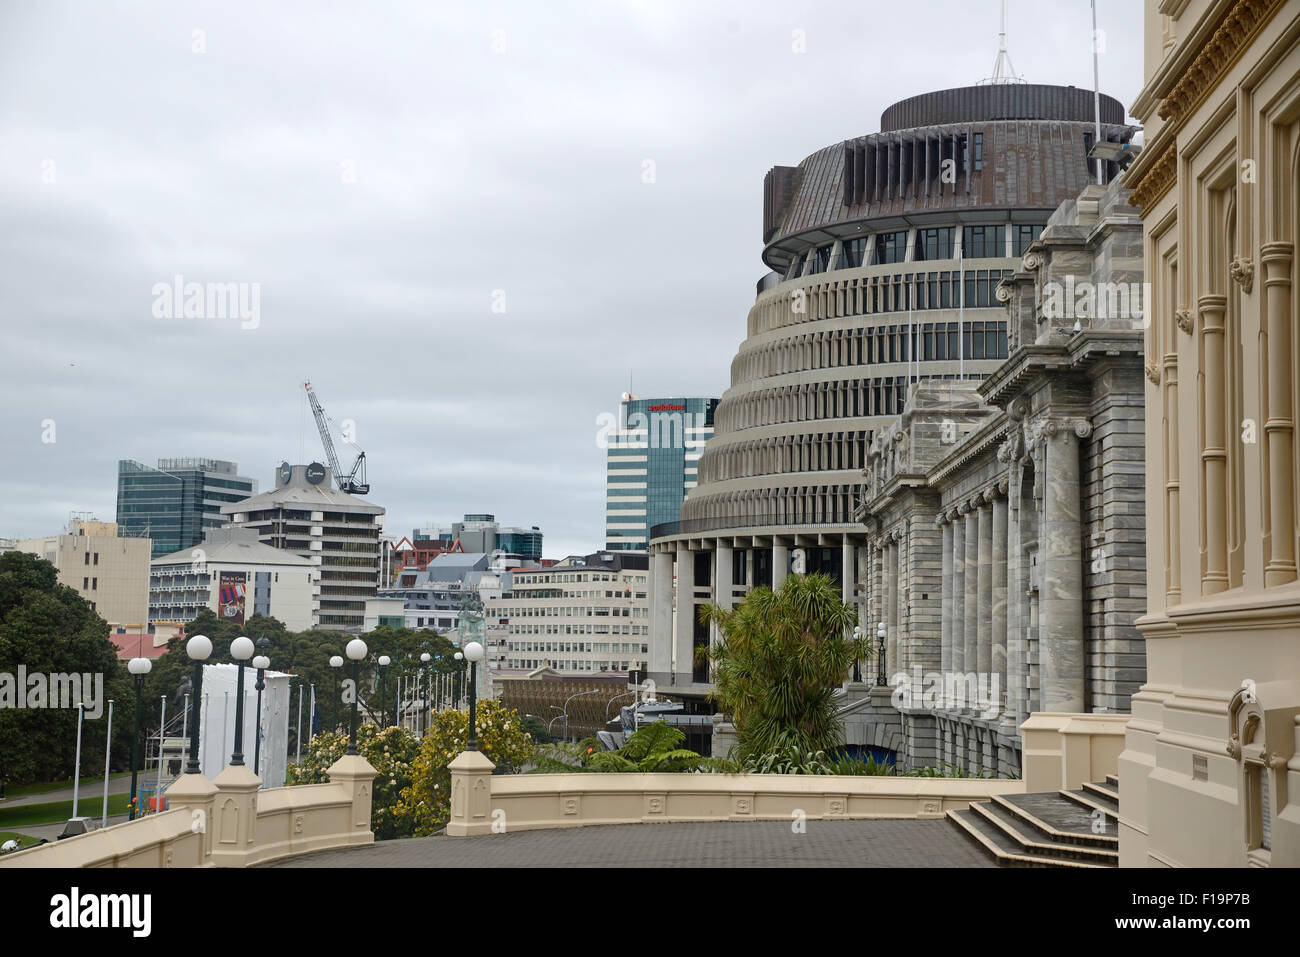 WELLINGTON, NEW ZEALAND, JULY 27, 2015: The seat of New Zealand Government, Parliament House in Wellington, New Zealand Stock Photo